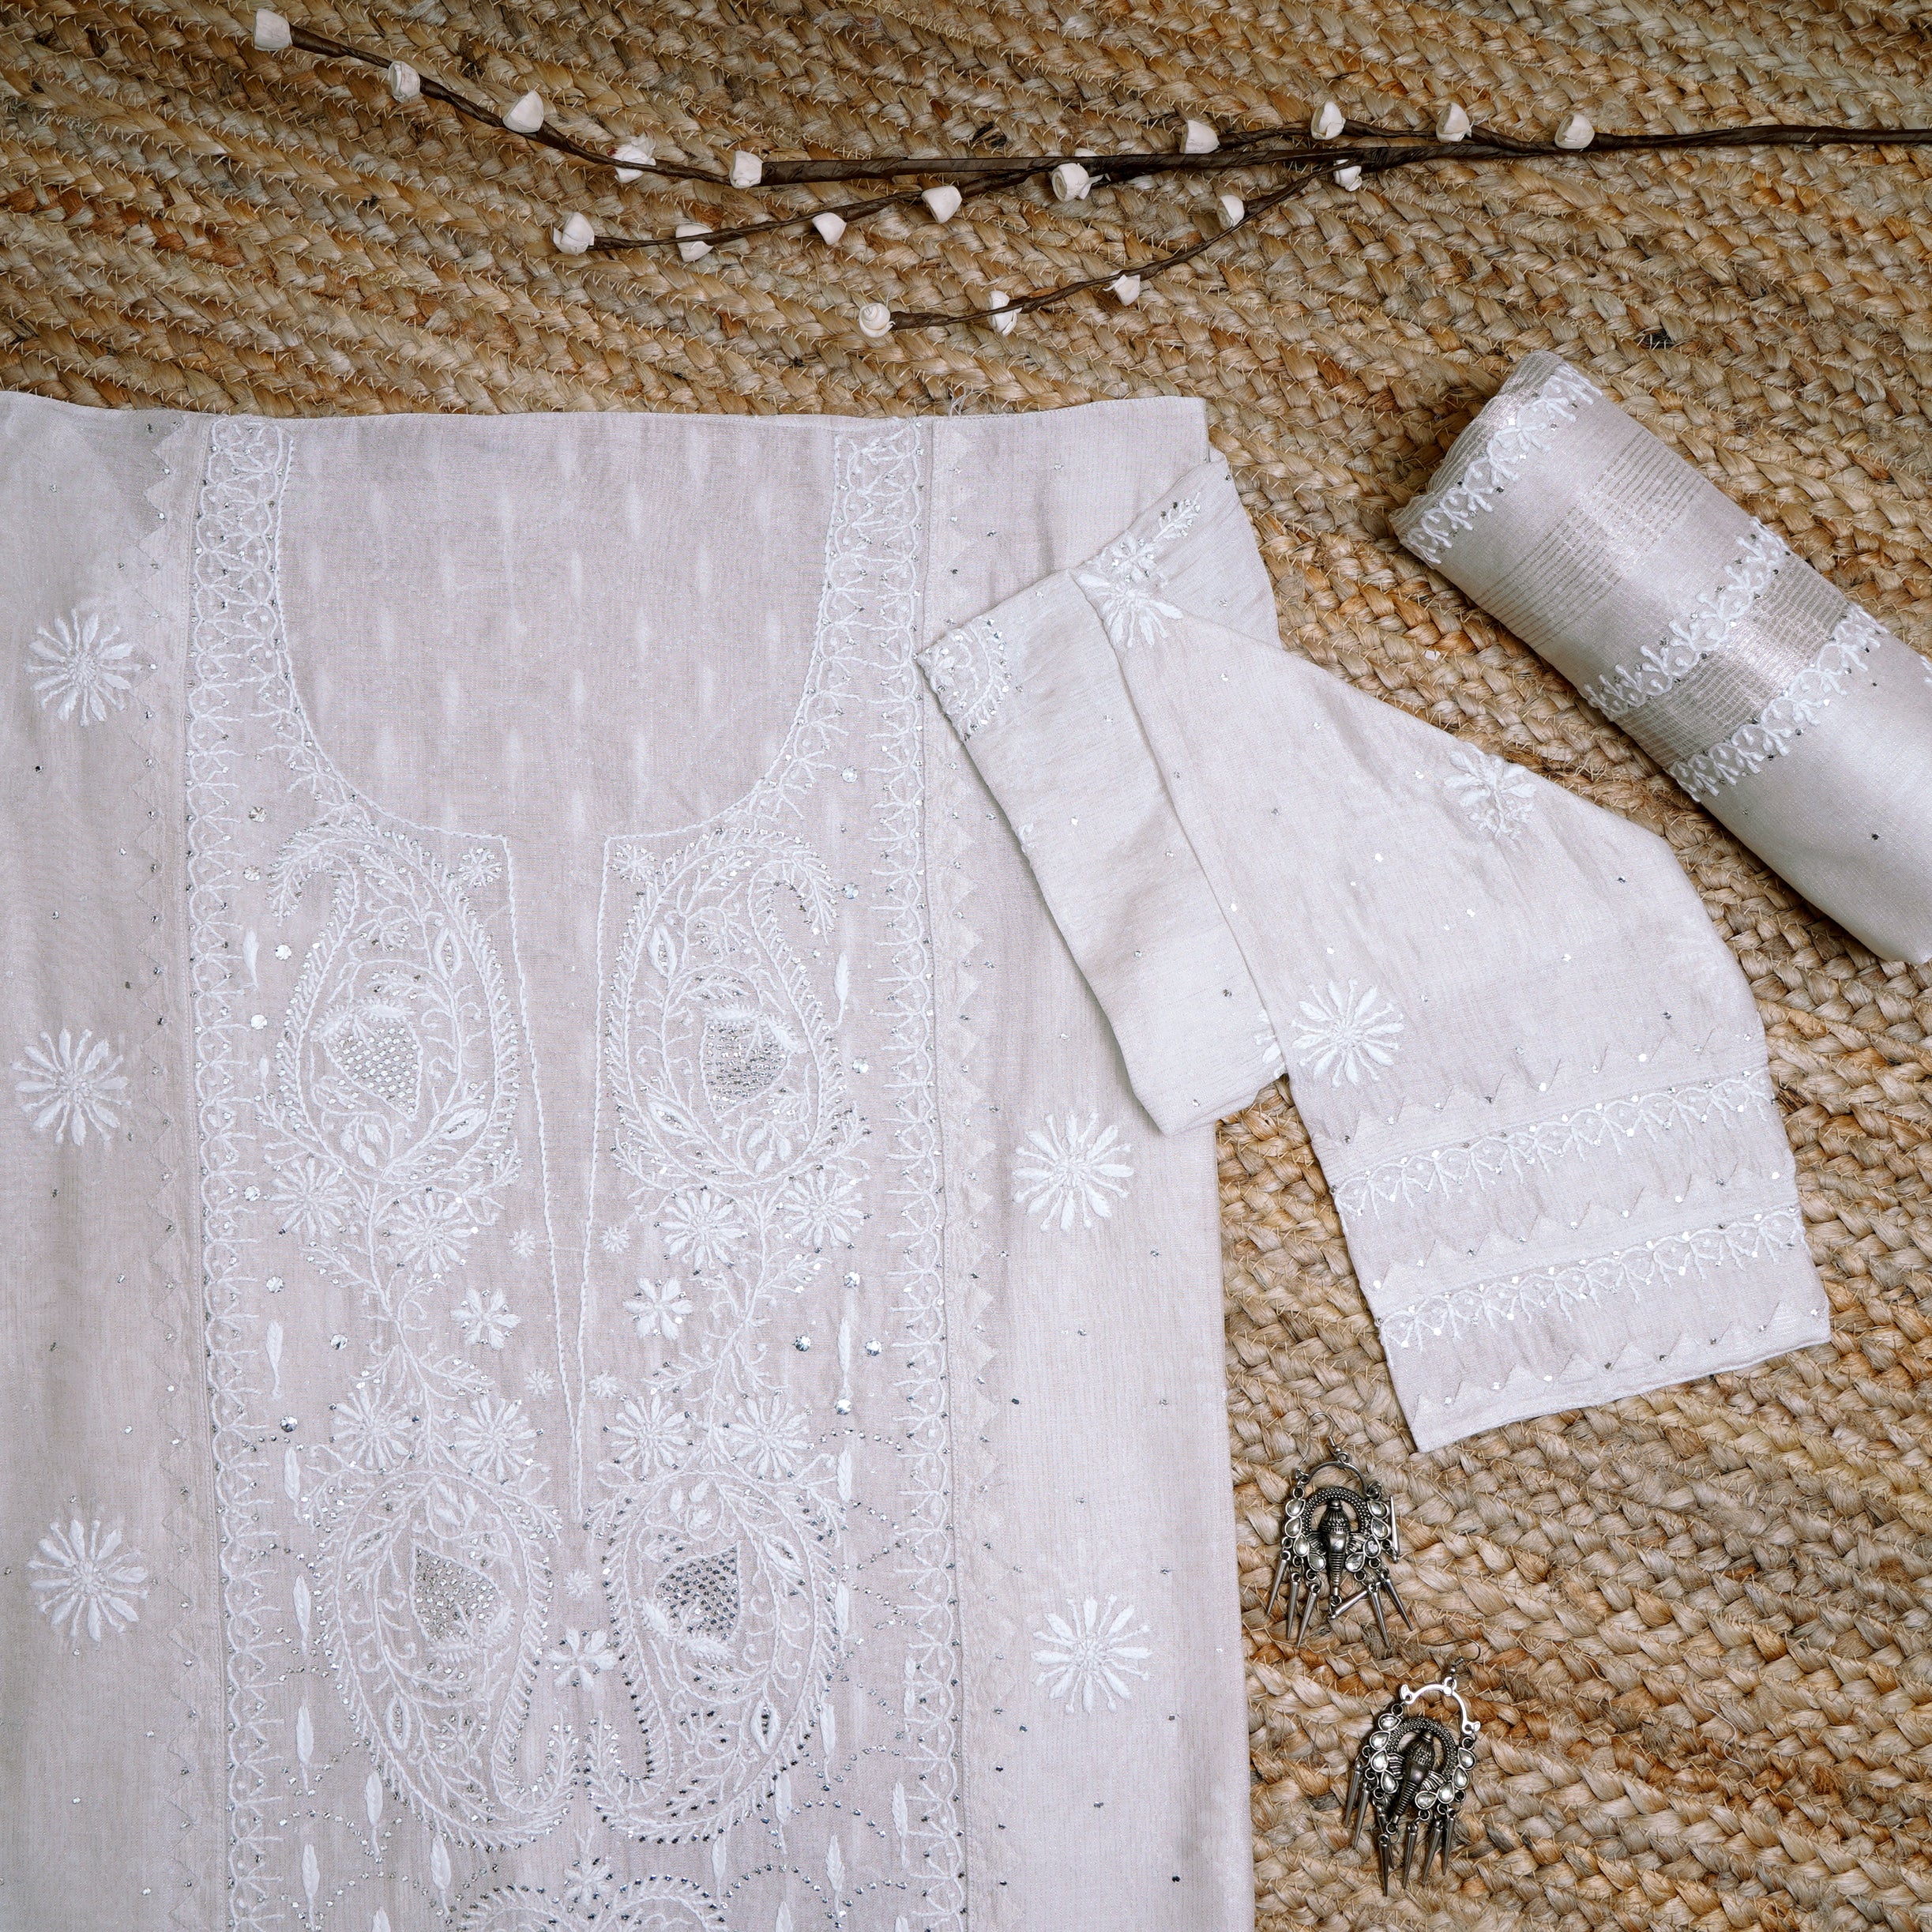 Off White Color Handcrafted Chikankari with Mukaish Work Tissue Unstitched Suit Set (Top & Dupatta)